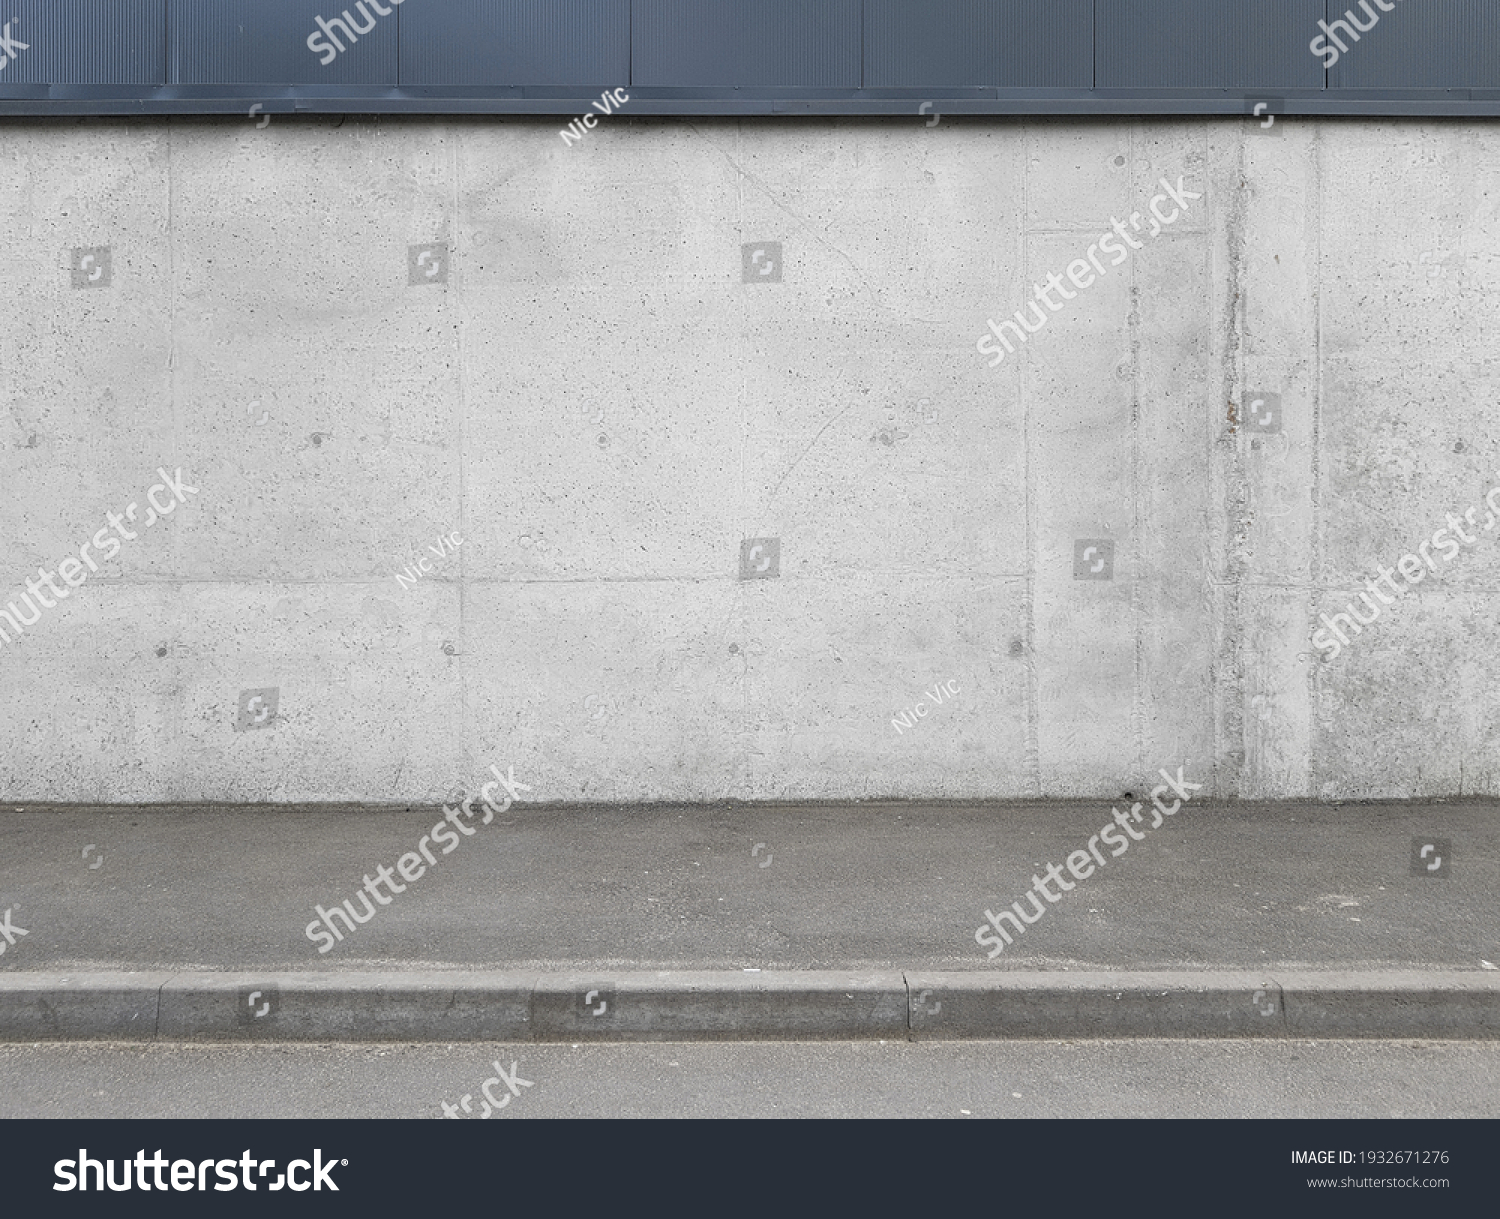 a fragment of an urban concrete wall of a building and an asphalt sidewalk, a building facade, a template or source #1932671276